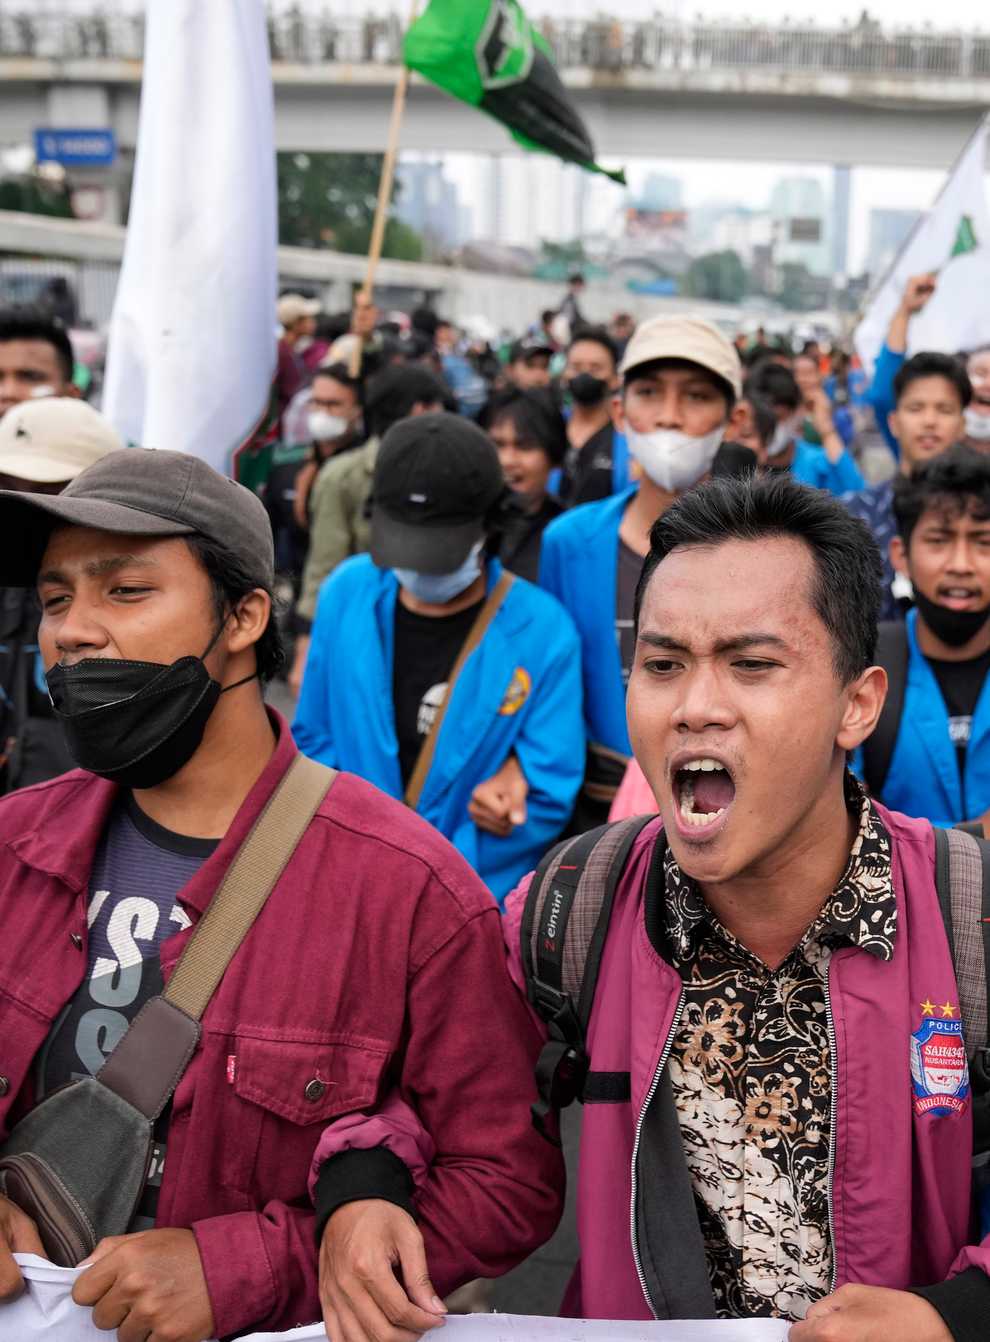 Students shout slogans during a rally outside the parliament in Jakarta, Indonesia, Monday, April 11, 2022. Thousands of students marched in cities around Indonesia on Monday to protest against rumors that the government is considering postponing the 2024 presidential election to allow President Joko Widodo to remain in office beyond the two-term legal limit, calling it a threat to the country’s democracy. (AP Photo/Dita Alangkara)